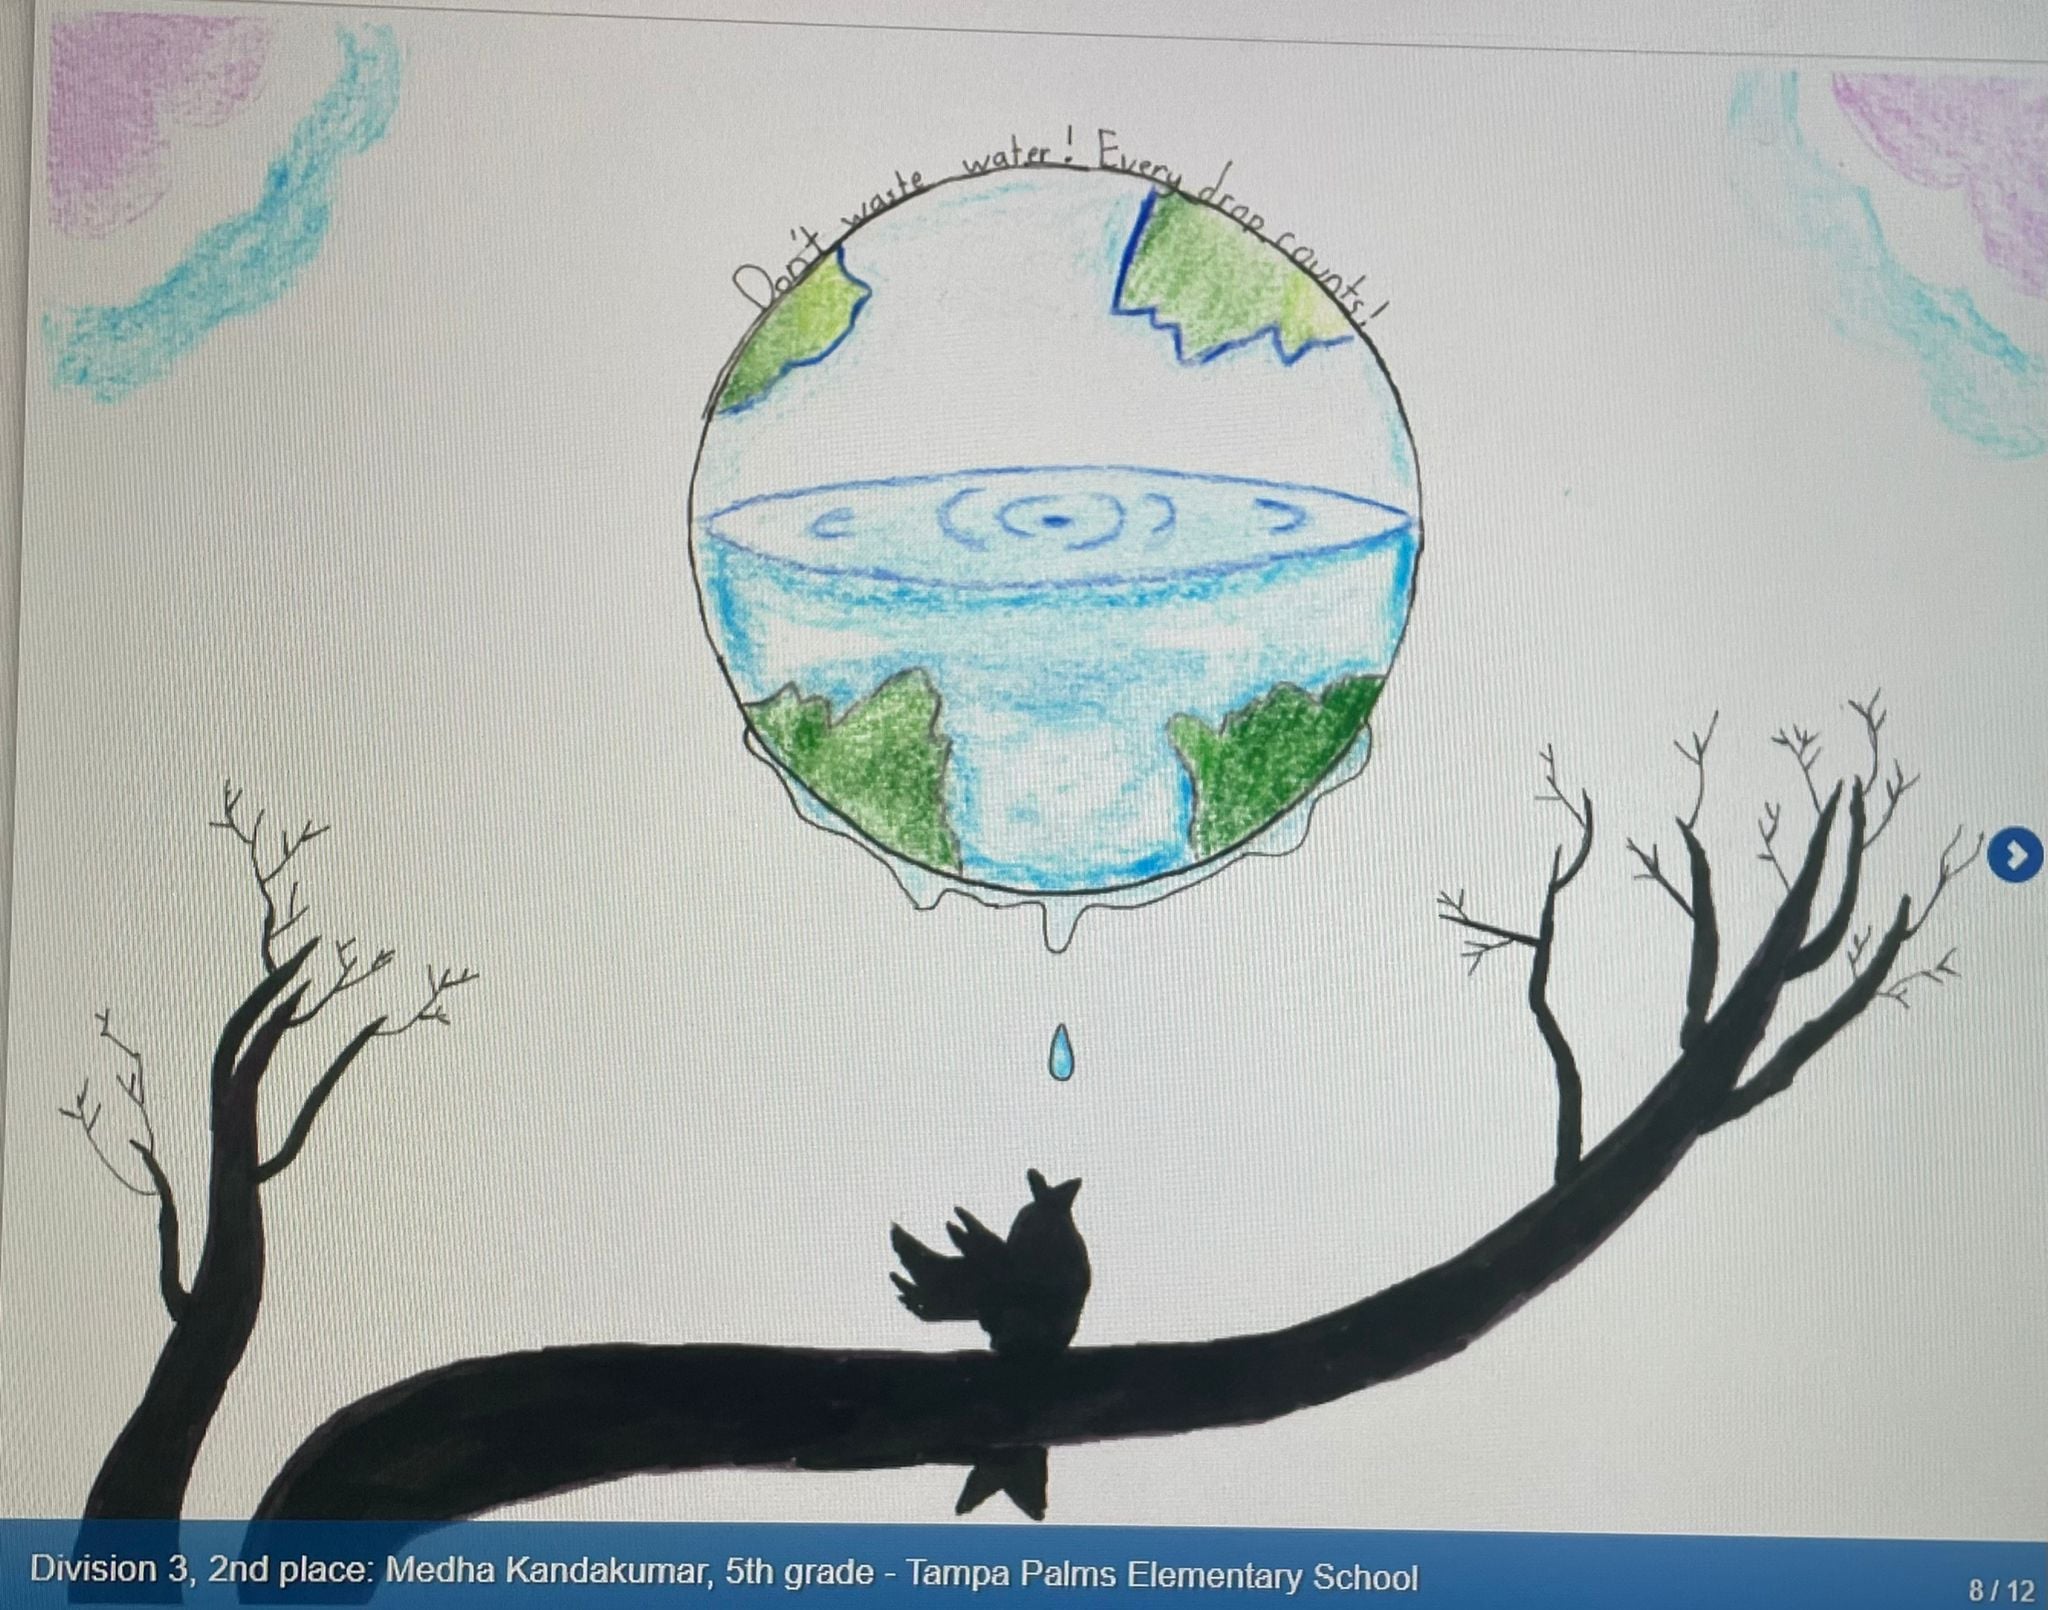 Save water poster/ save water drawing | Save water poster drawing, Poster  on pollution, Alphabet activities preschool